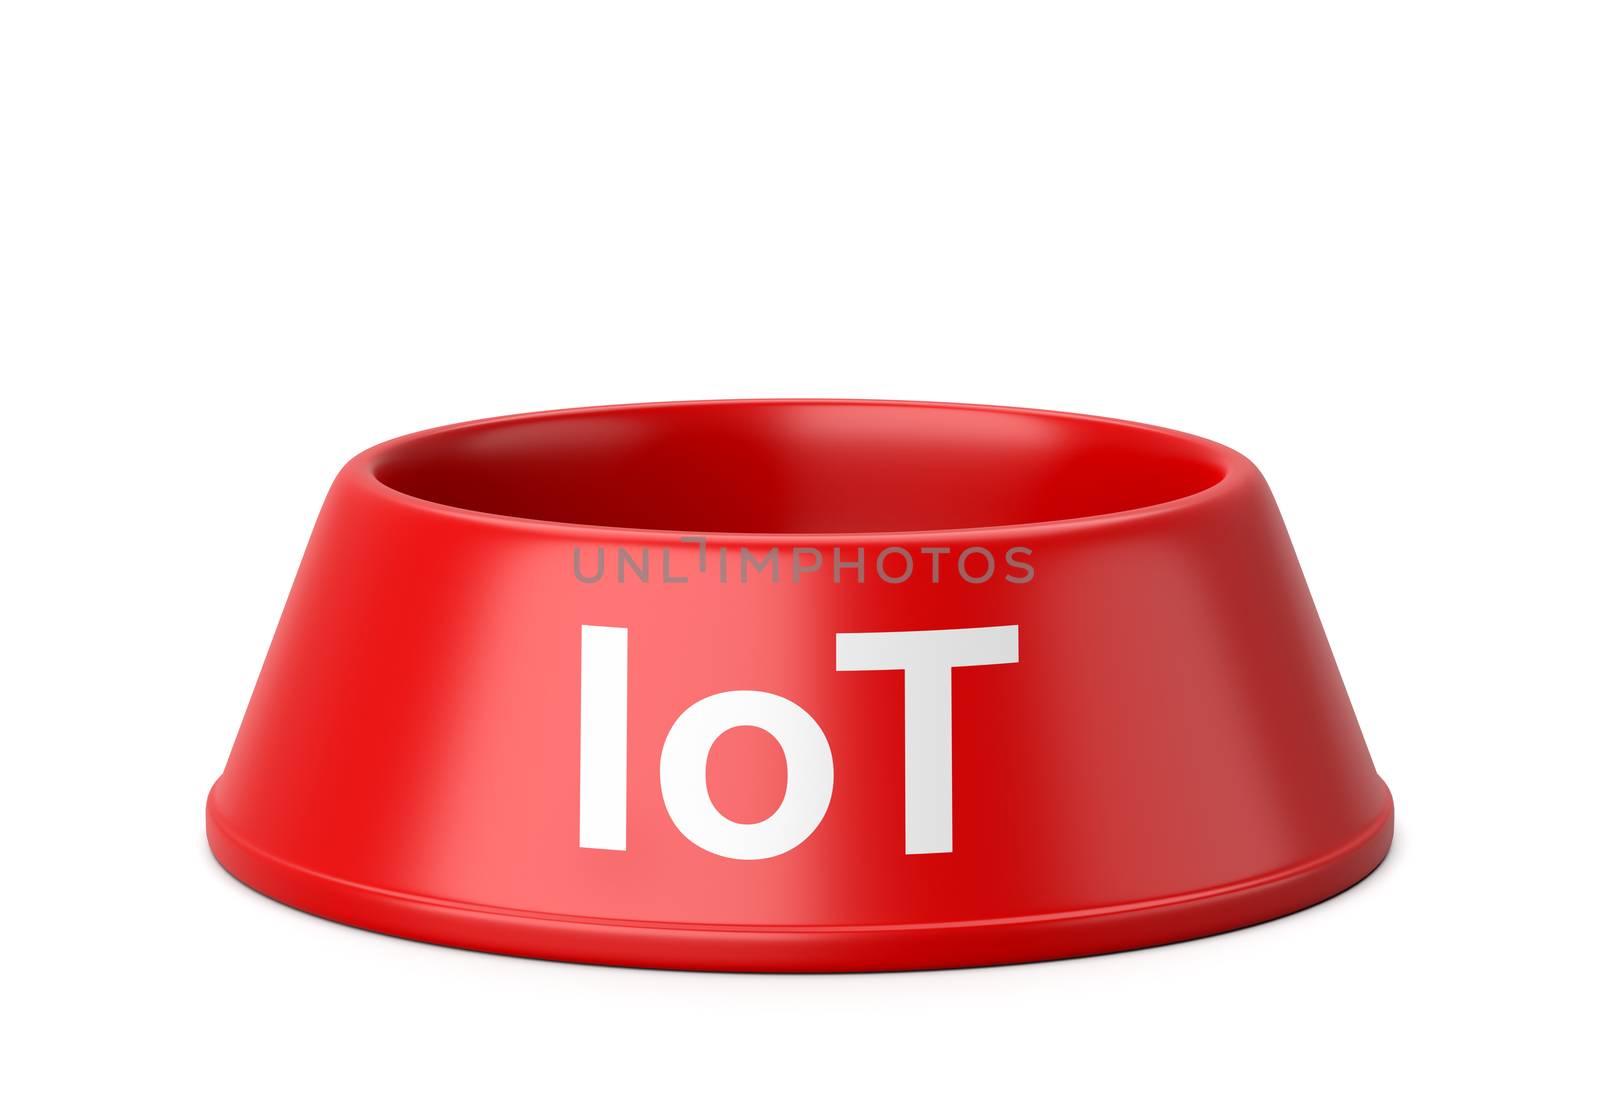 Empty Red Plastic Pets Bowl with IoT Text Isolated on White Background 3D Illustration, Internet of Things Concept